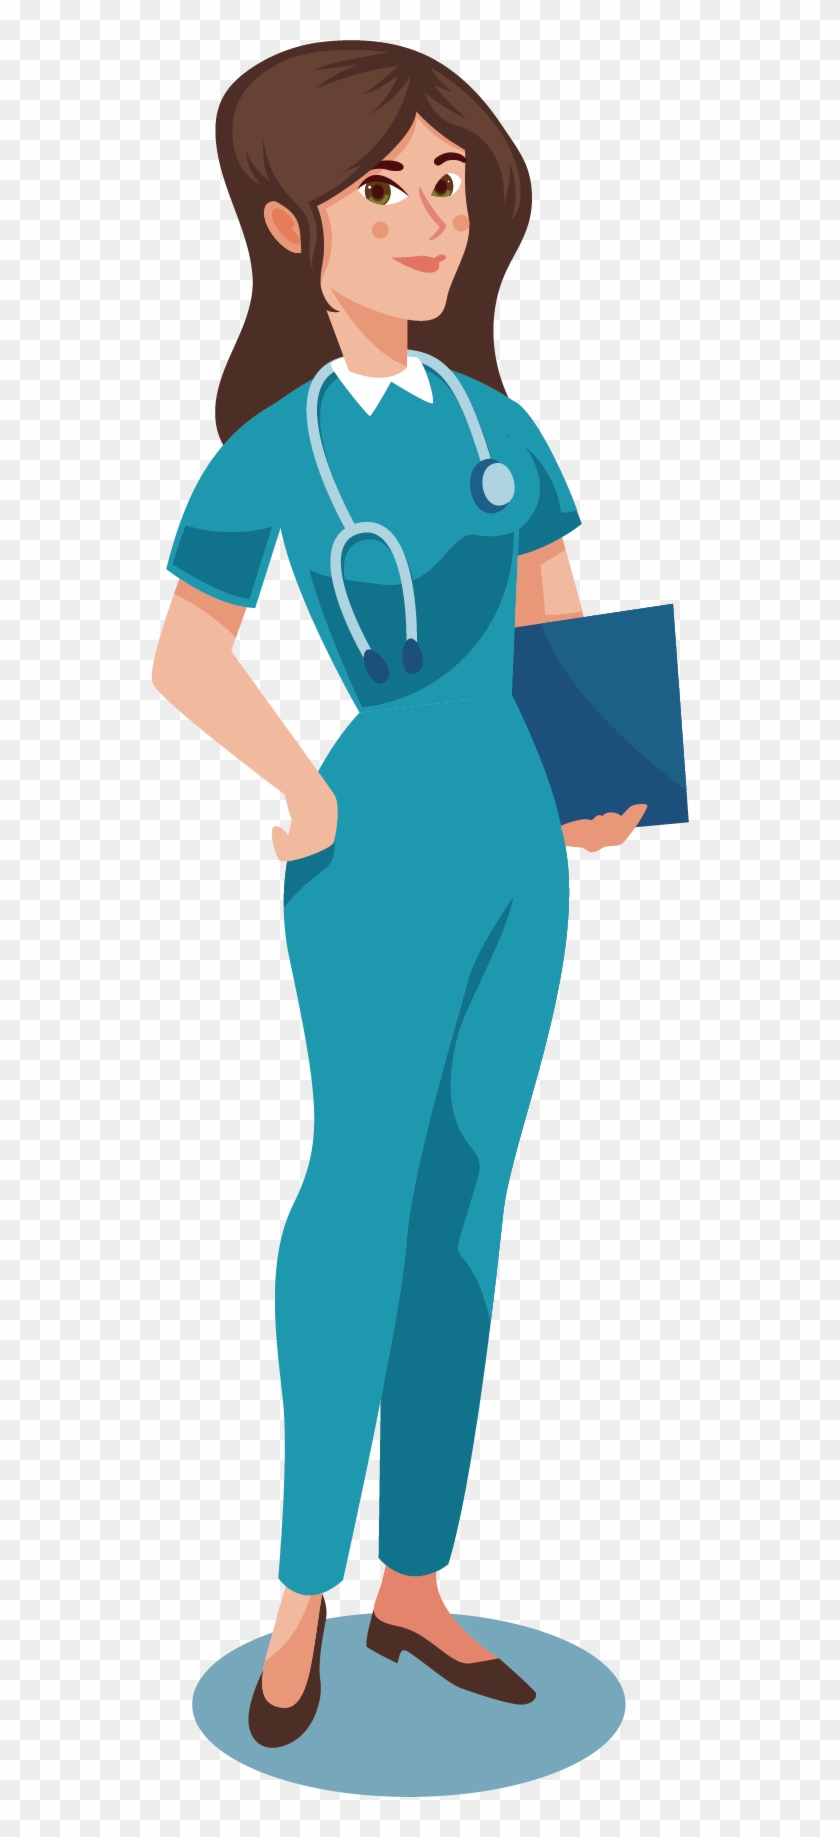 Cartoon Woman Illustration - Doctor Cartoon Woman Png - Free Transparent  PNG Clipart Images Download